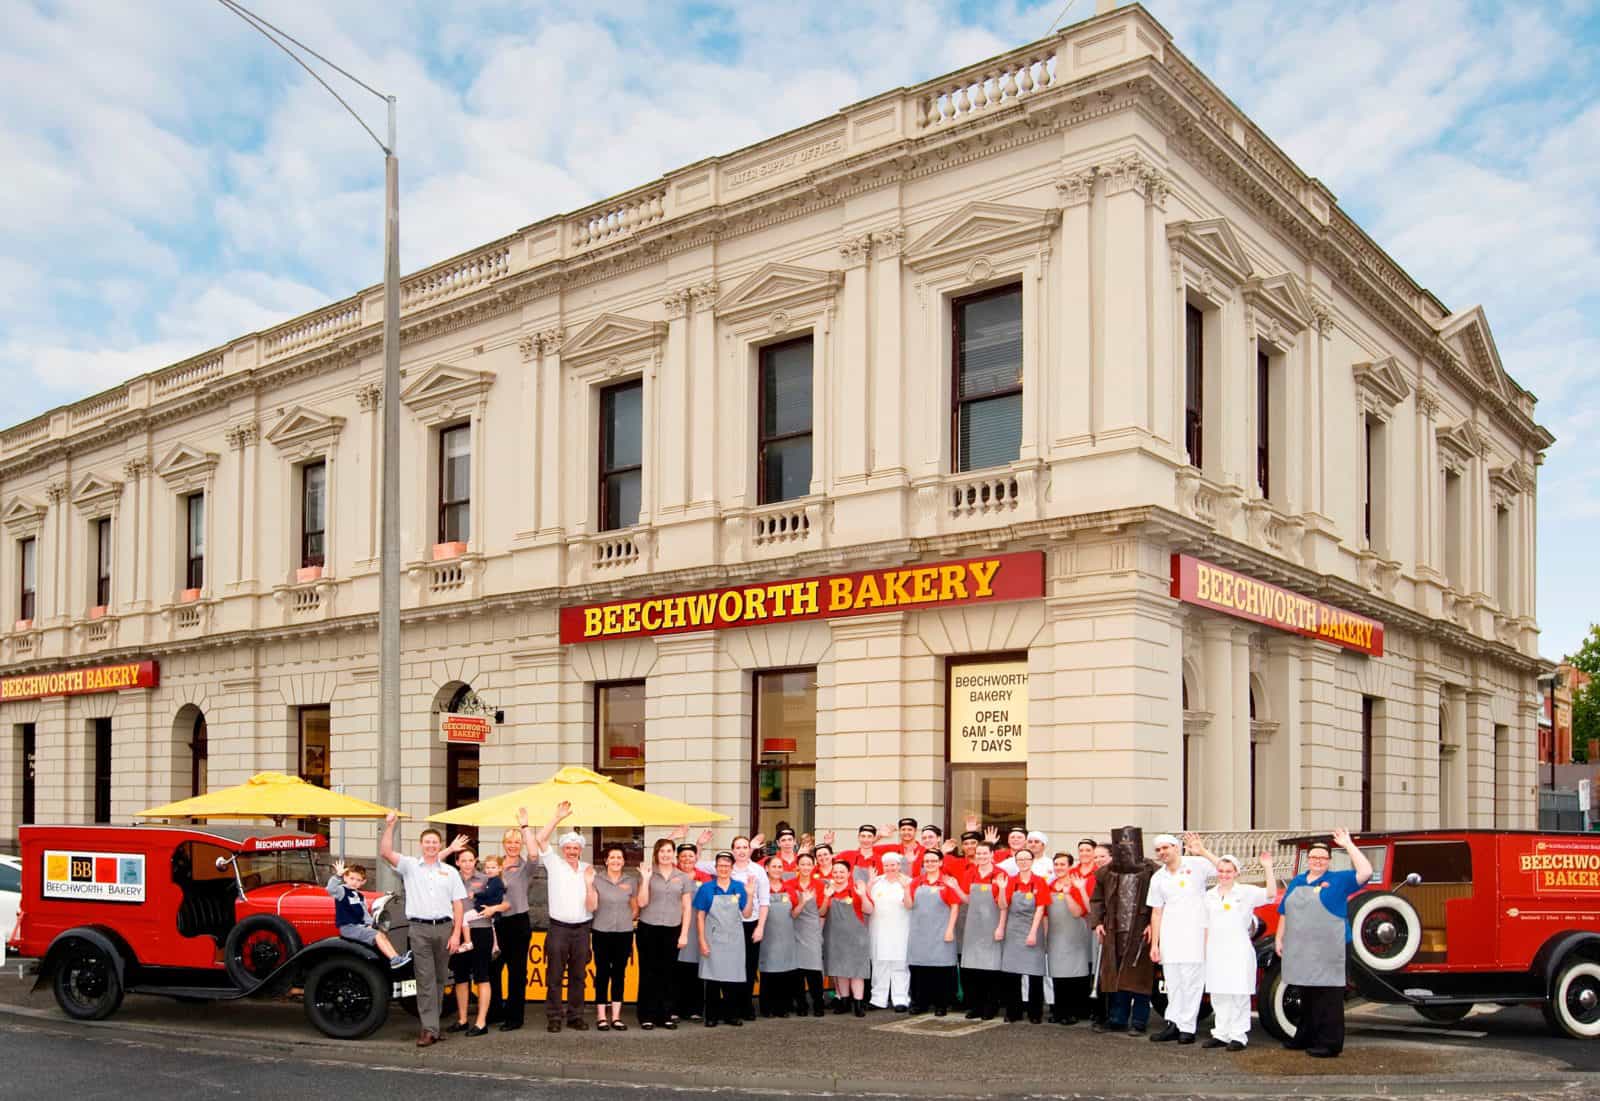 The Ballarat team ready to welcome you to Beechworth Bakery